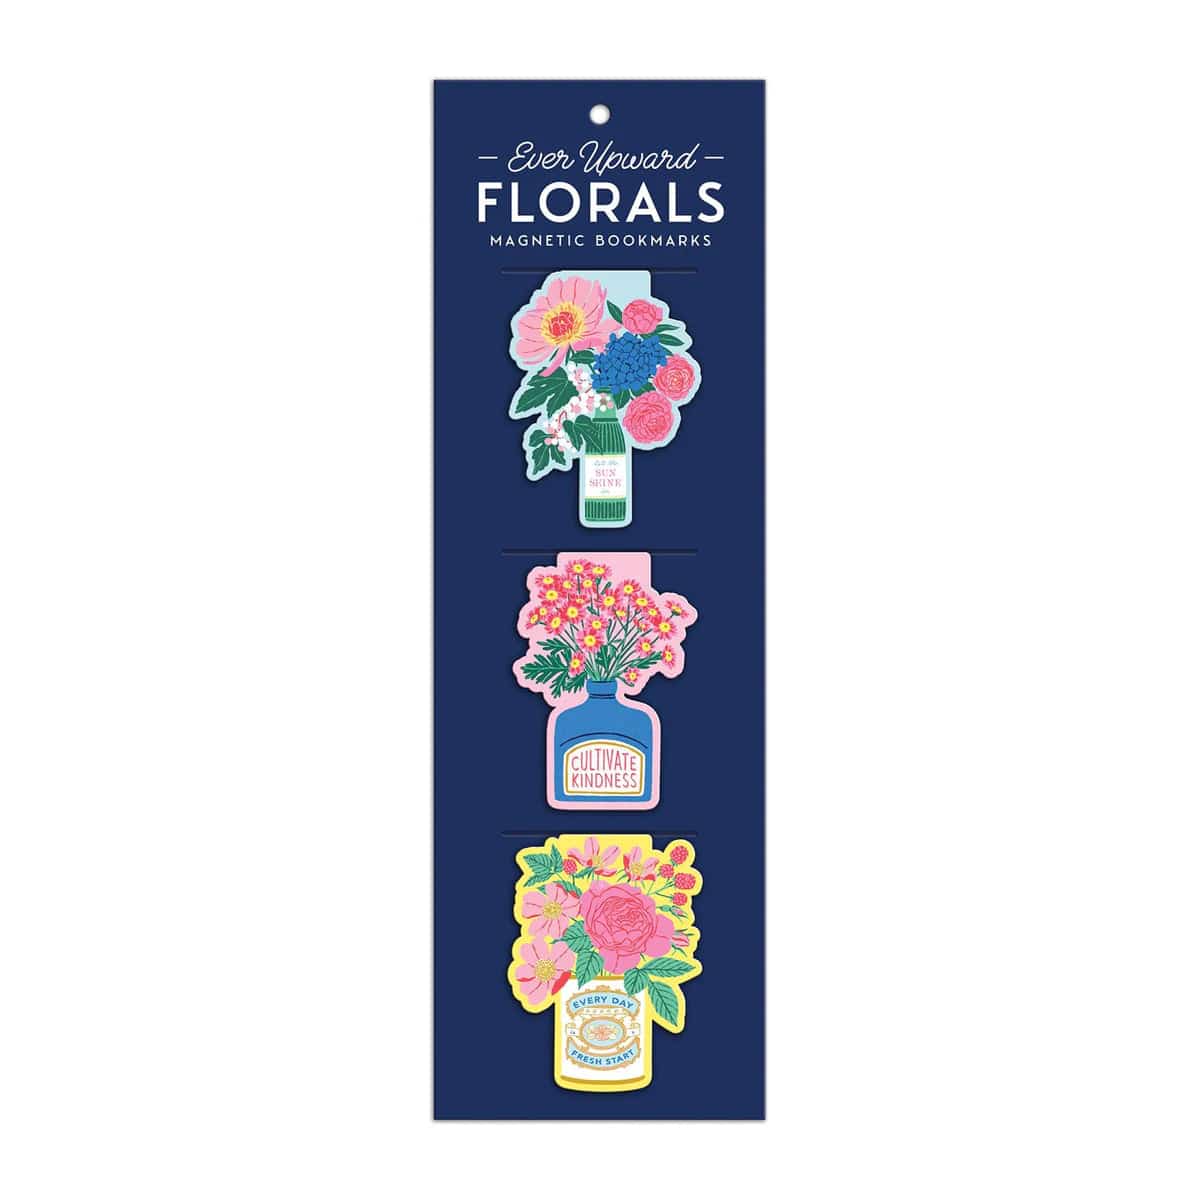 Ever Upward Florals Shaped Magnetic Bookmarks - The Preppy Bunny